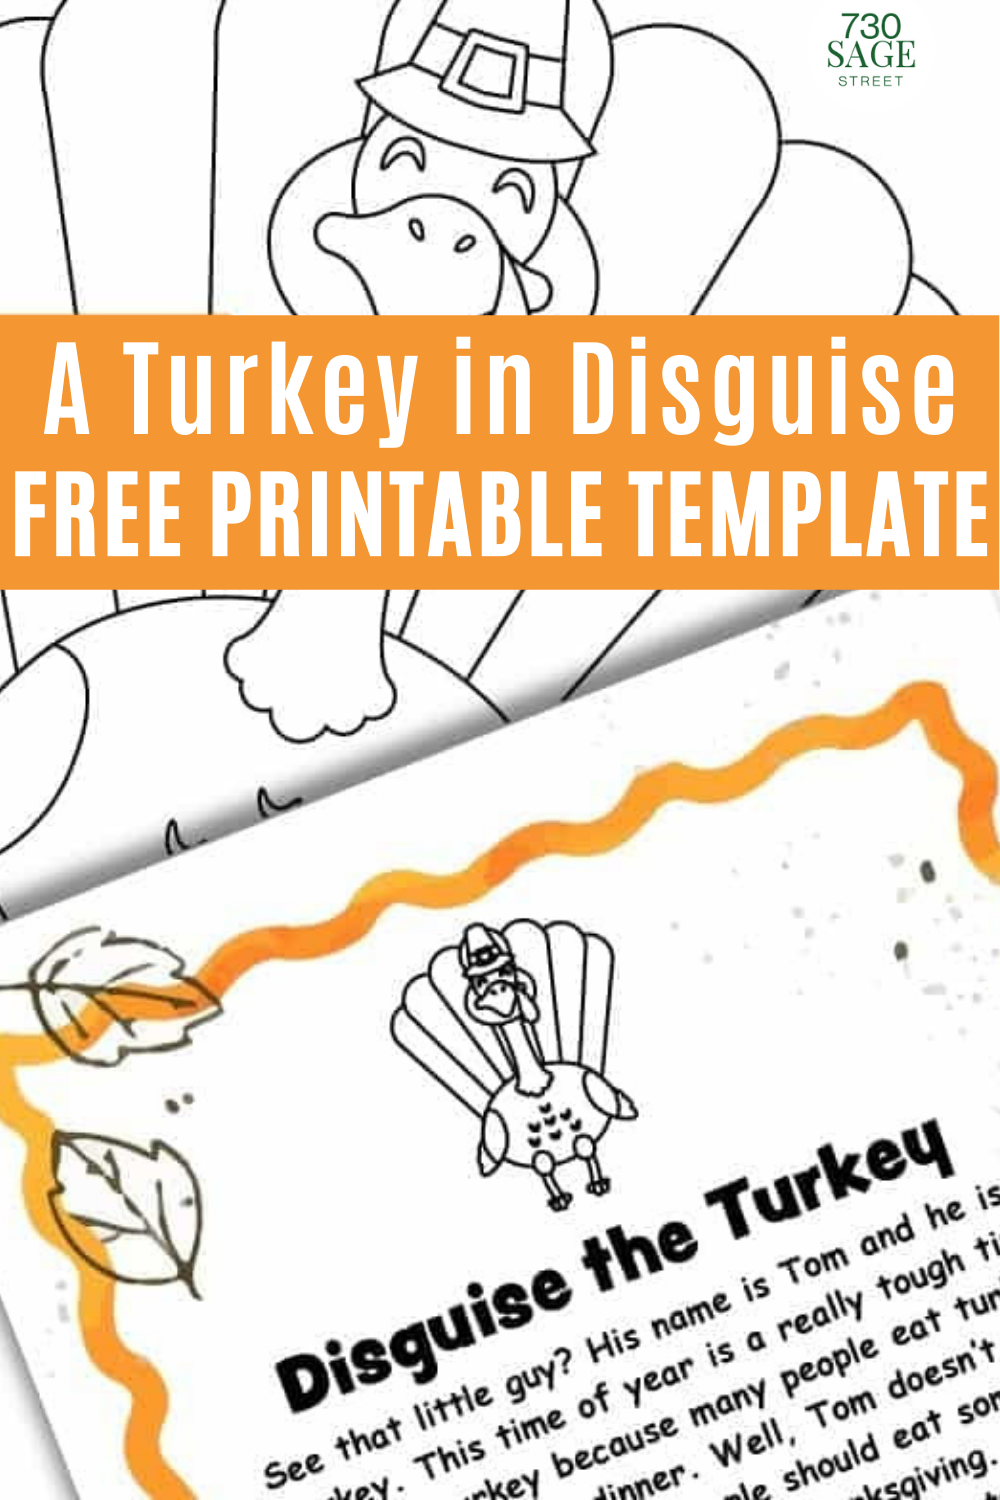 A Turkey in Disguise Project Free Printable Template - A Turkey in Disguise Project Free Printable Template -   18 disguise a turkey project printable template ideas